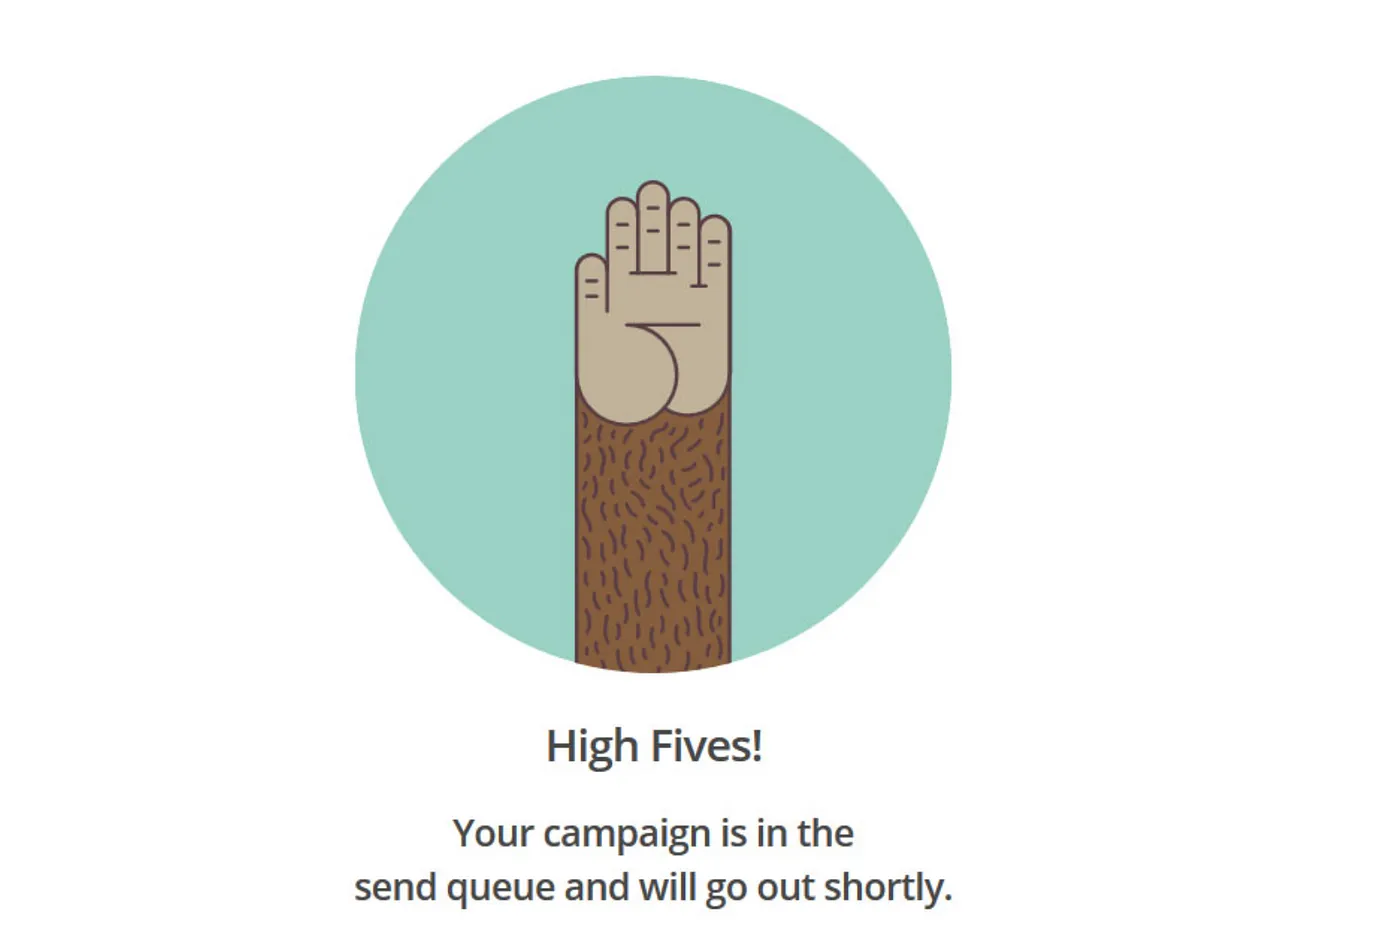 Mailchimp users used to see when they ran their first email campaign